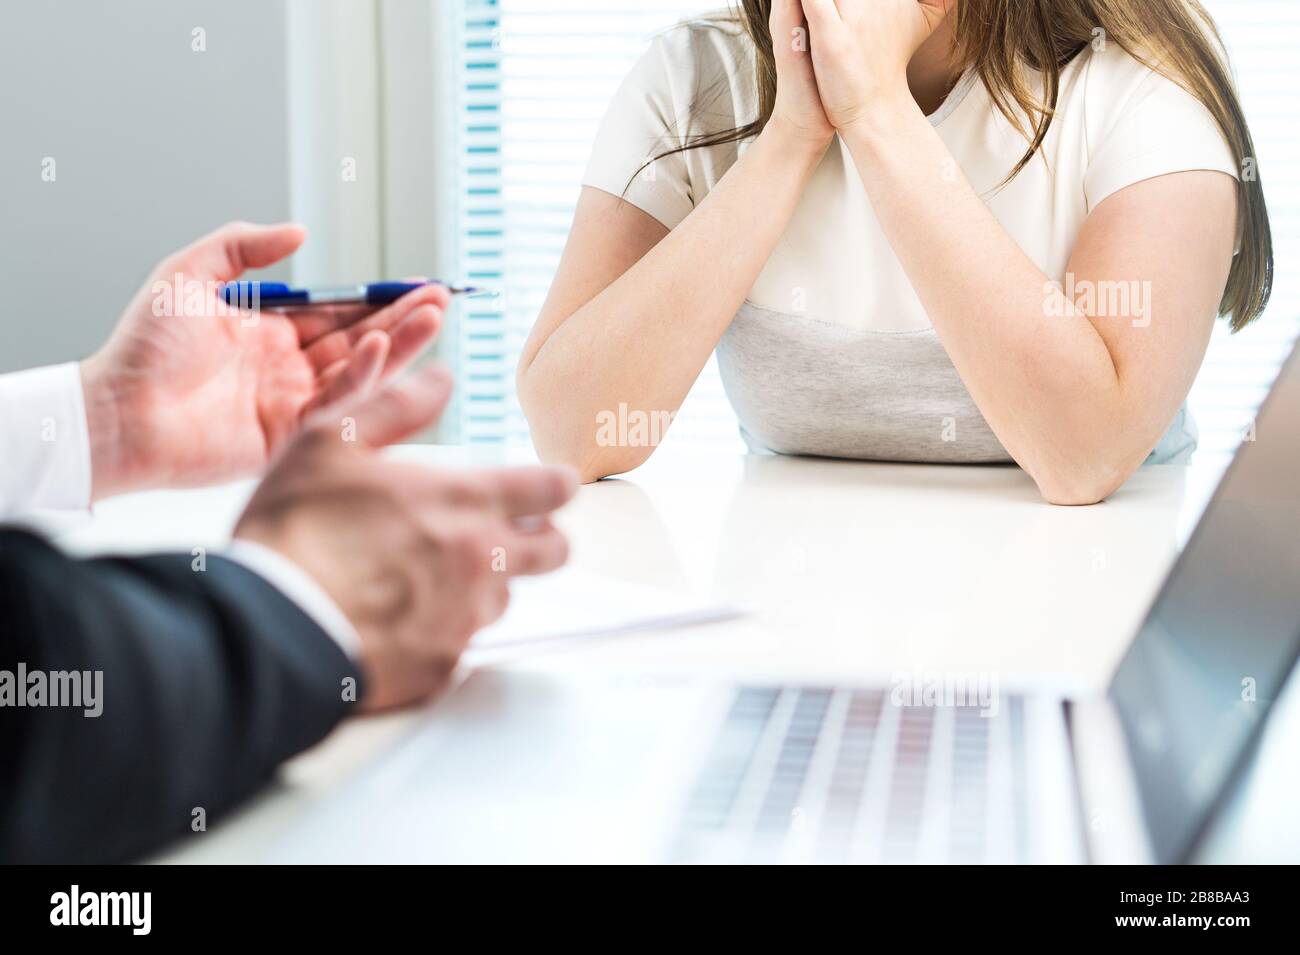 Young woman getting fired from work in office. Boss complaining or giving negative feedback to unhappy worker. Sad job applicant. Stock Photo